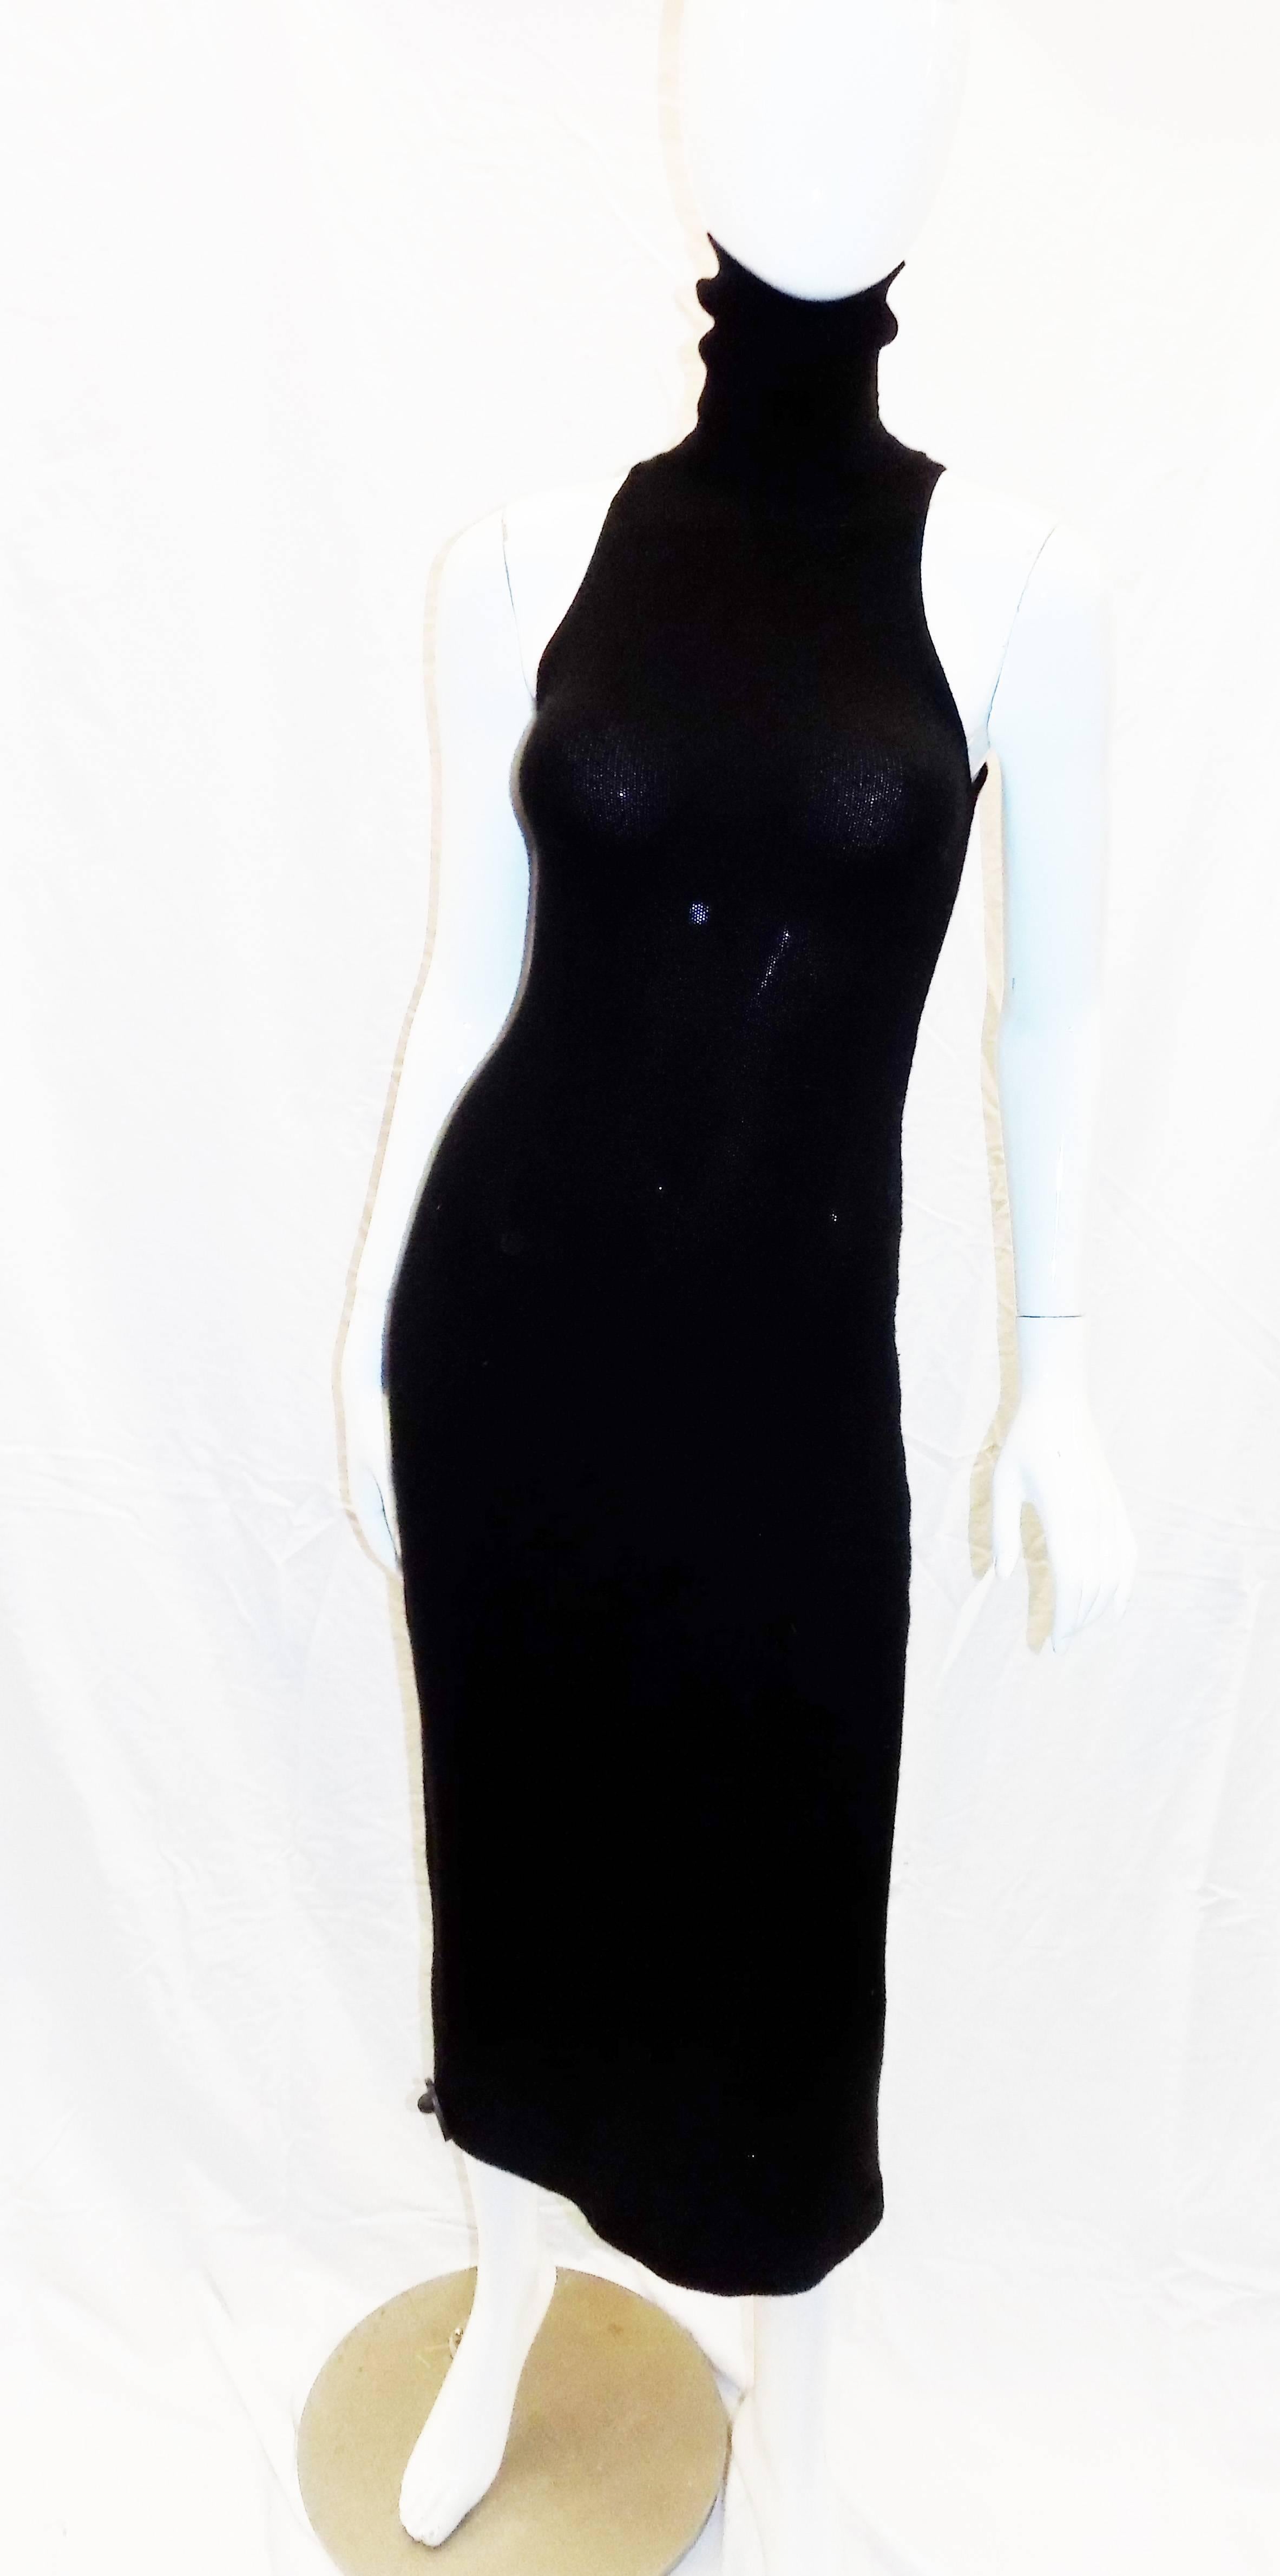 Fabulous Ralph Lauren black label Black Cashmere  sleevless sweater dress w turtle neck. Worn with jacket over to office or as a cocktail dress with jewelry it will always make you stand out!!
Size small. Pristine condition. Like new!